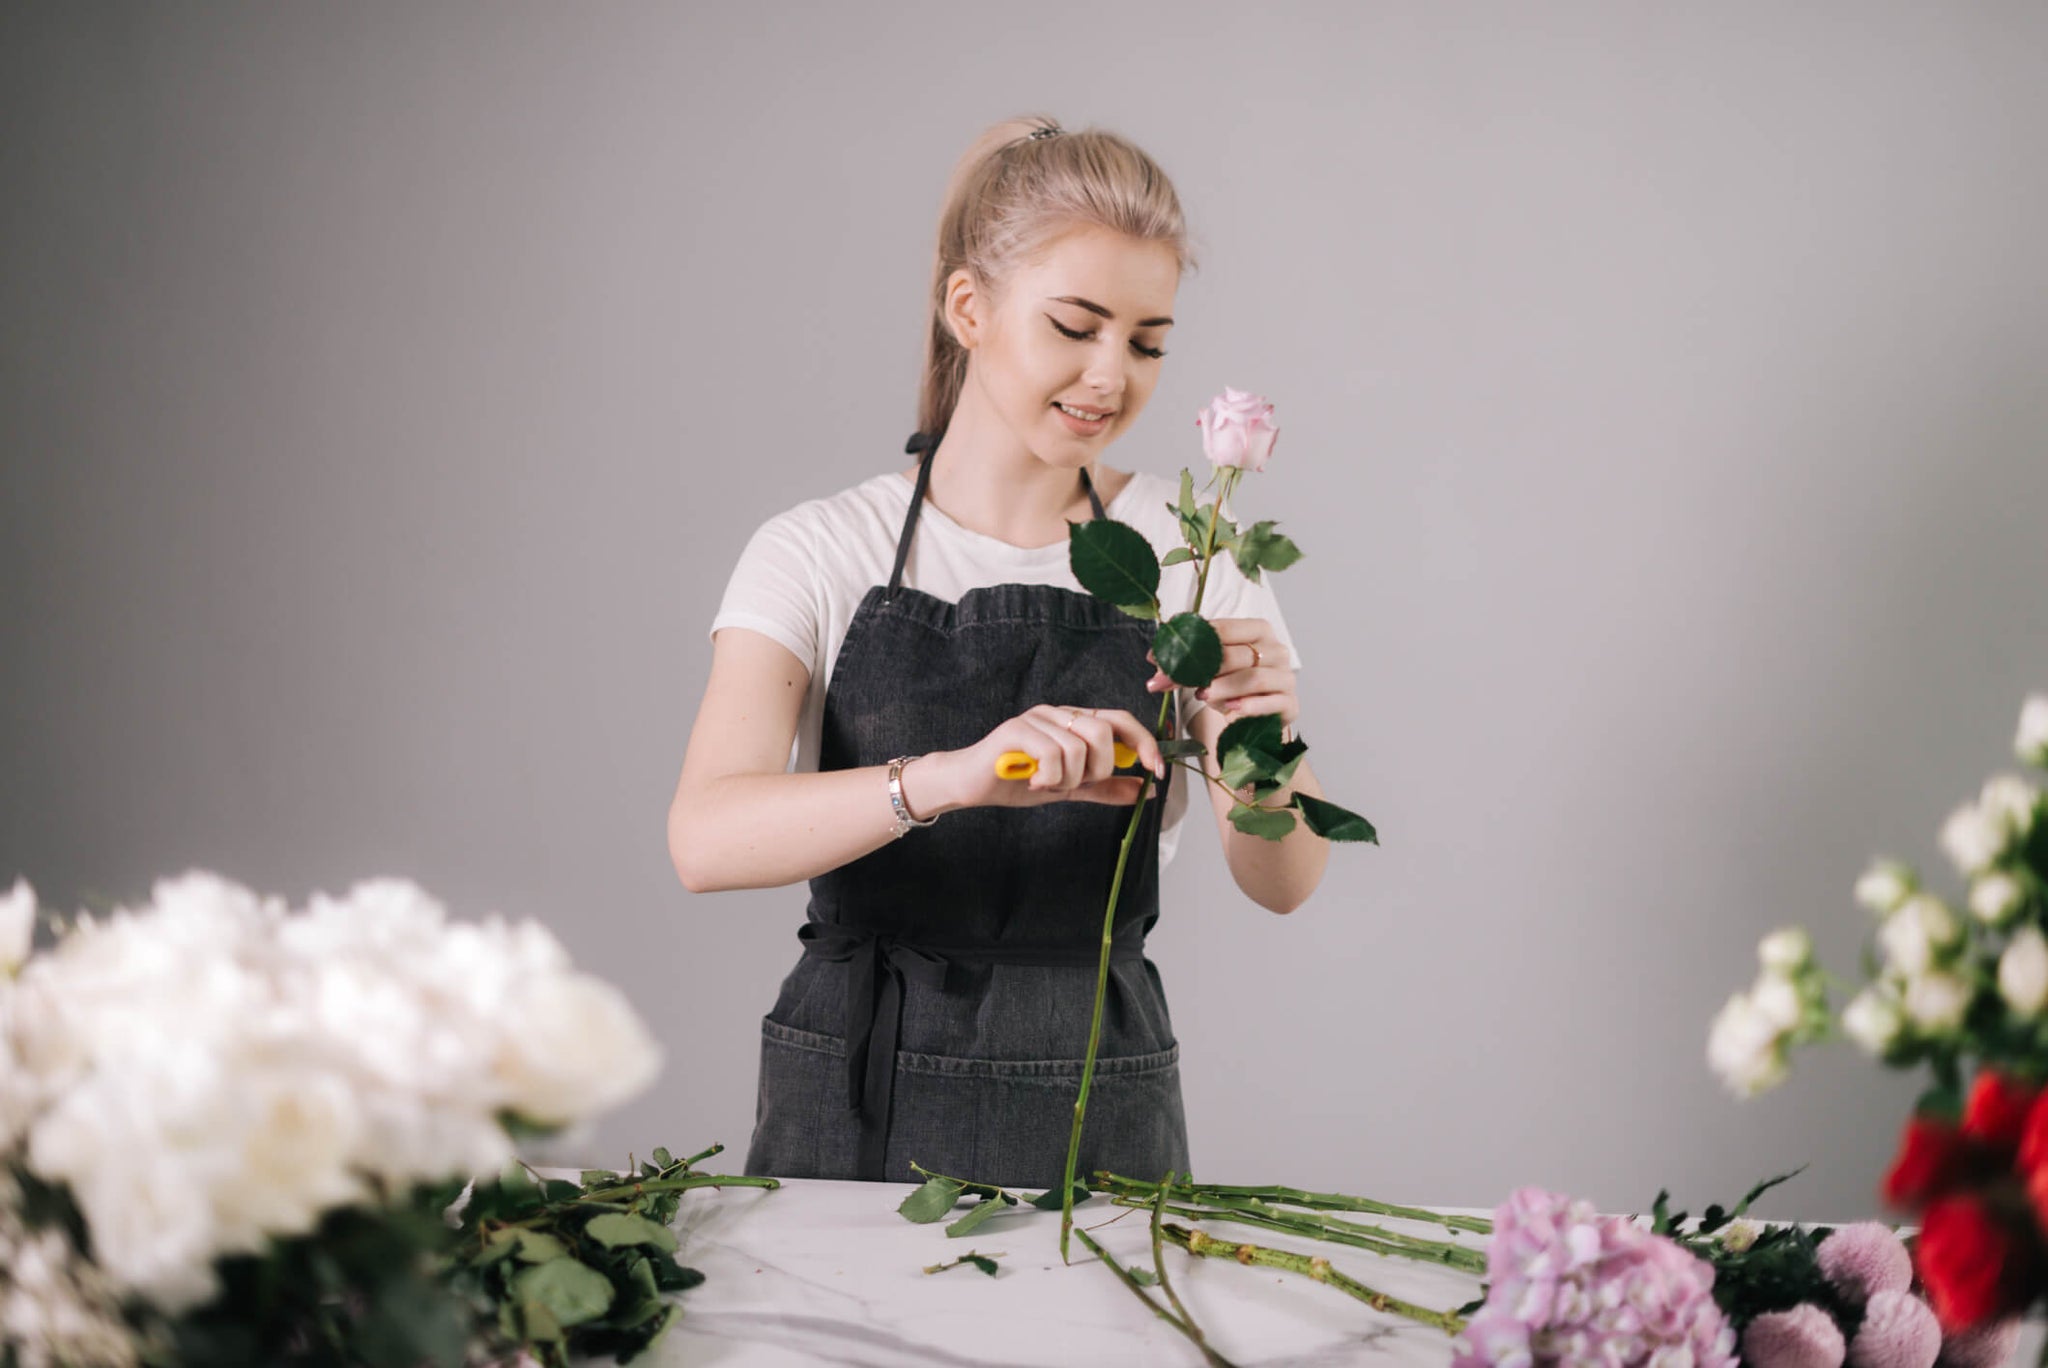 Woman removing the excess leaves from a long stem rose.